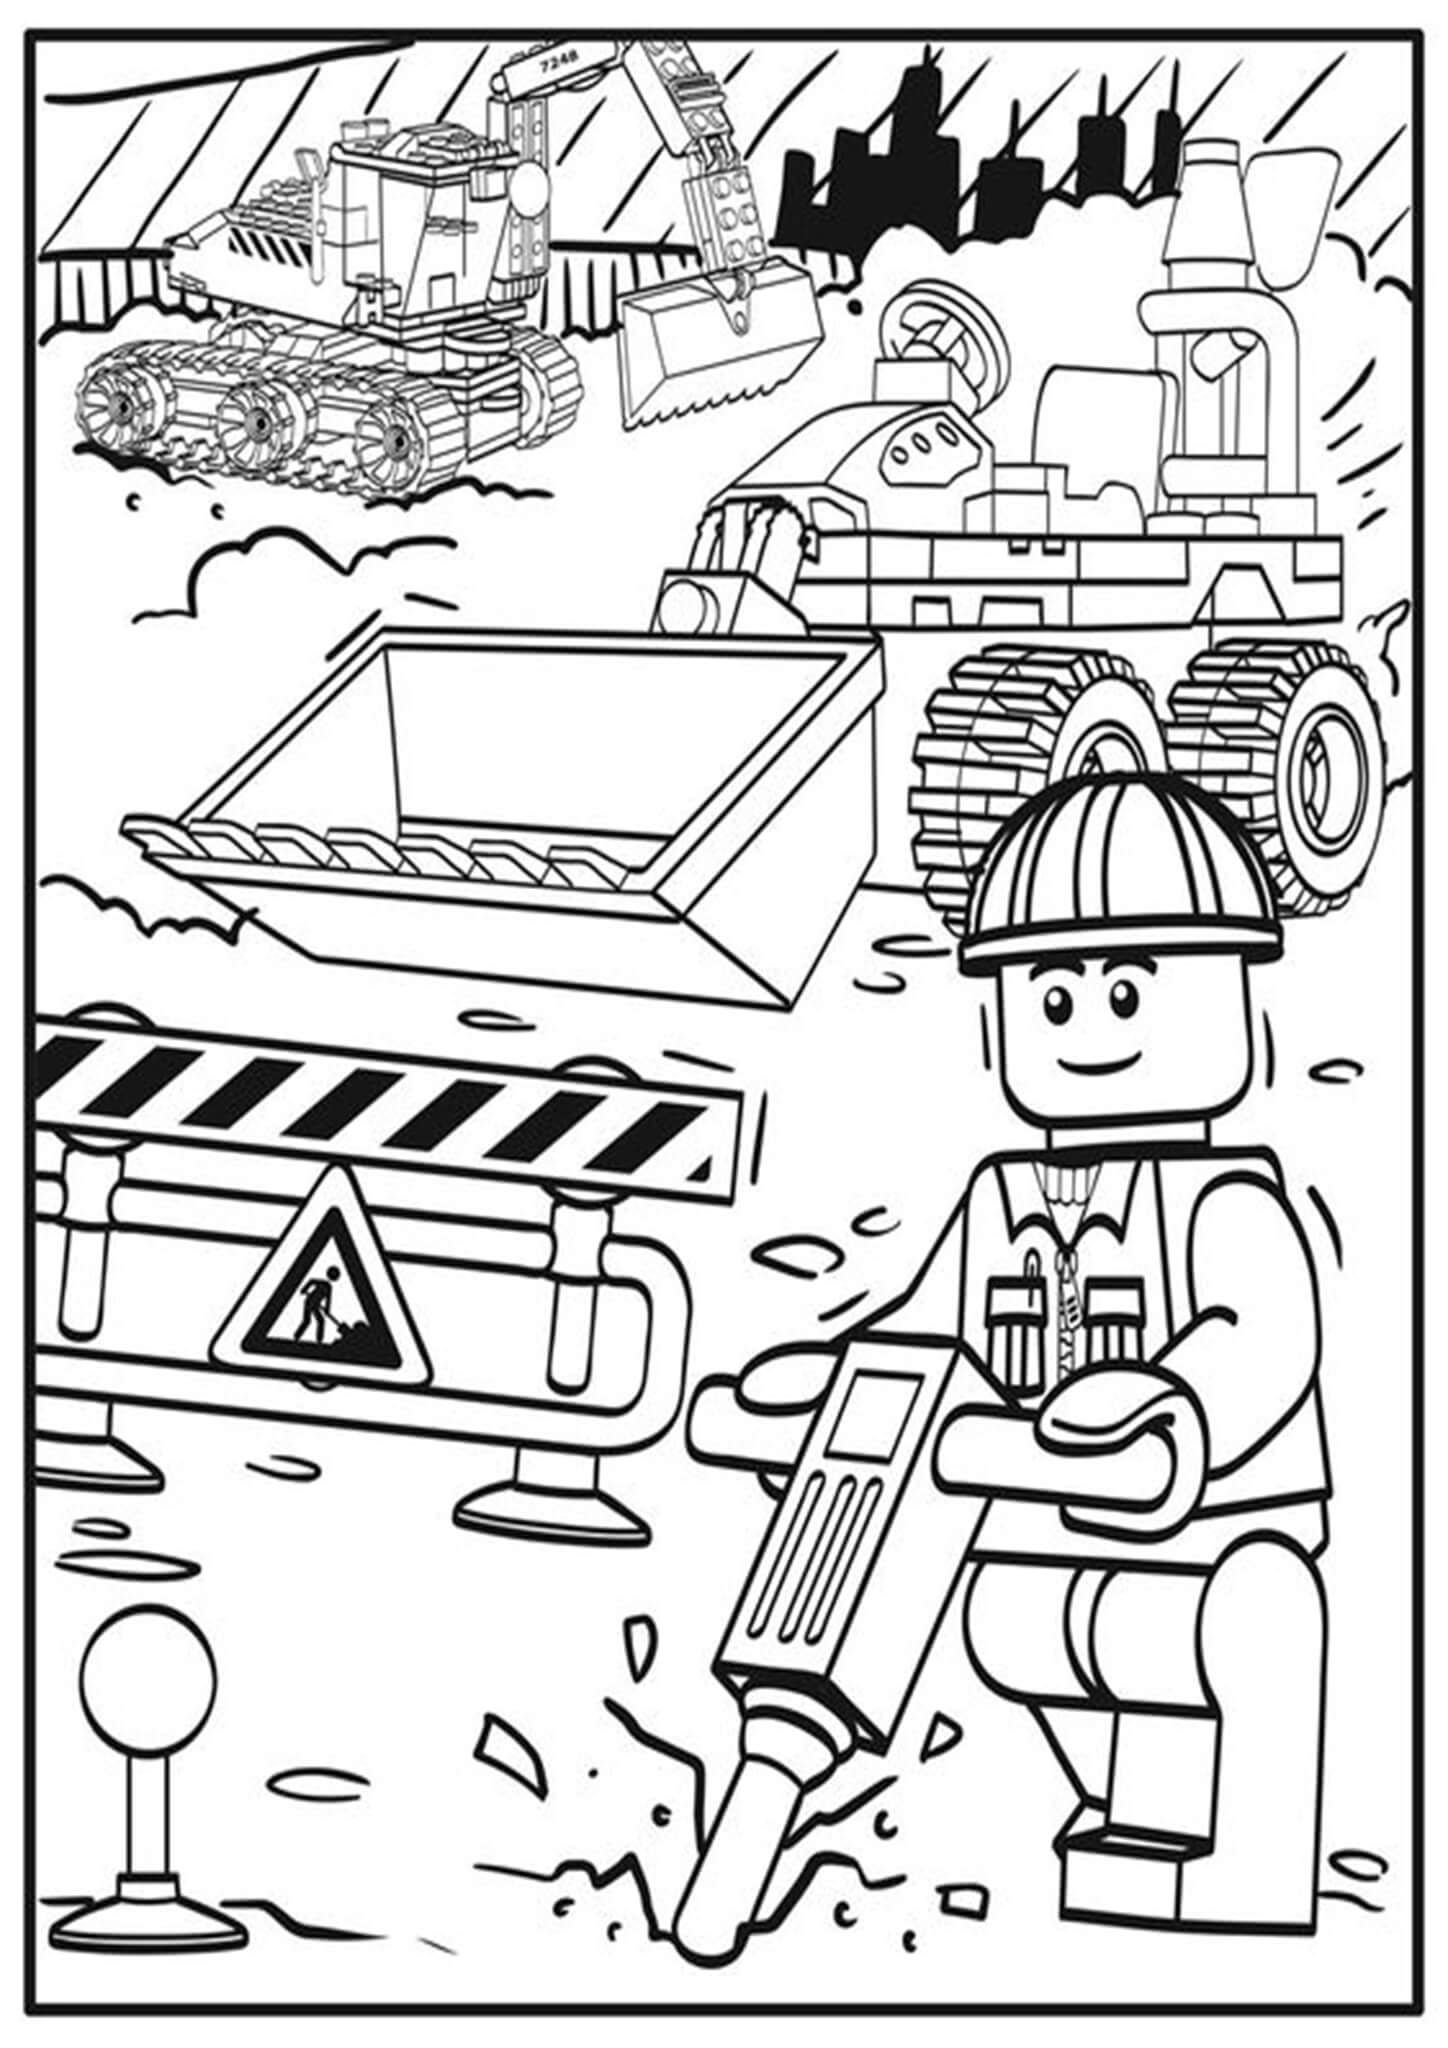 Free easy to print lego coloring pages lego coloring pages lego coloring printable coloring pages